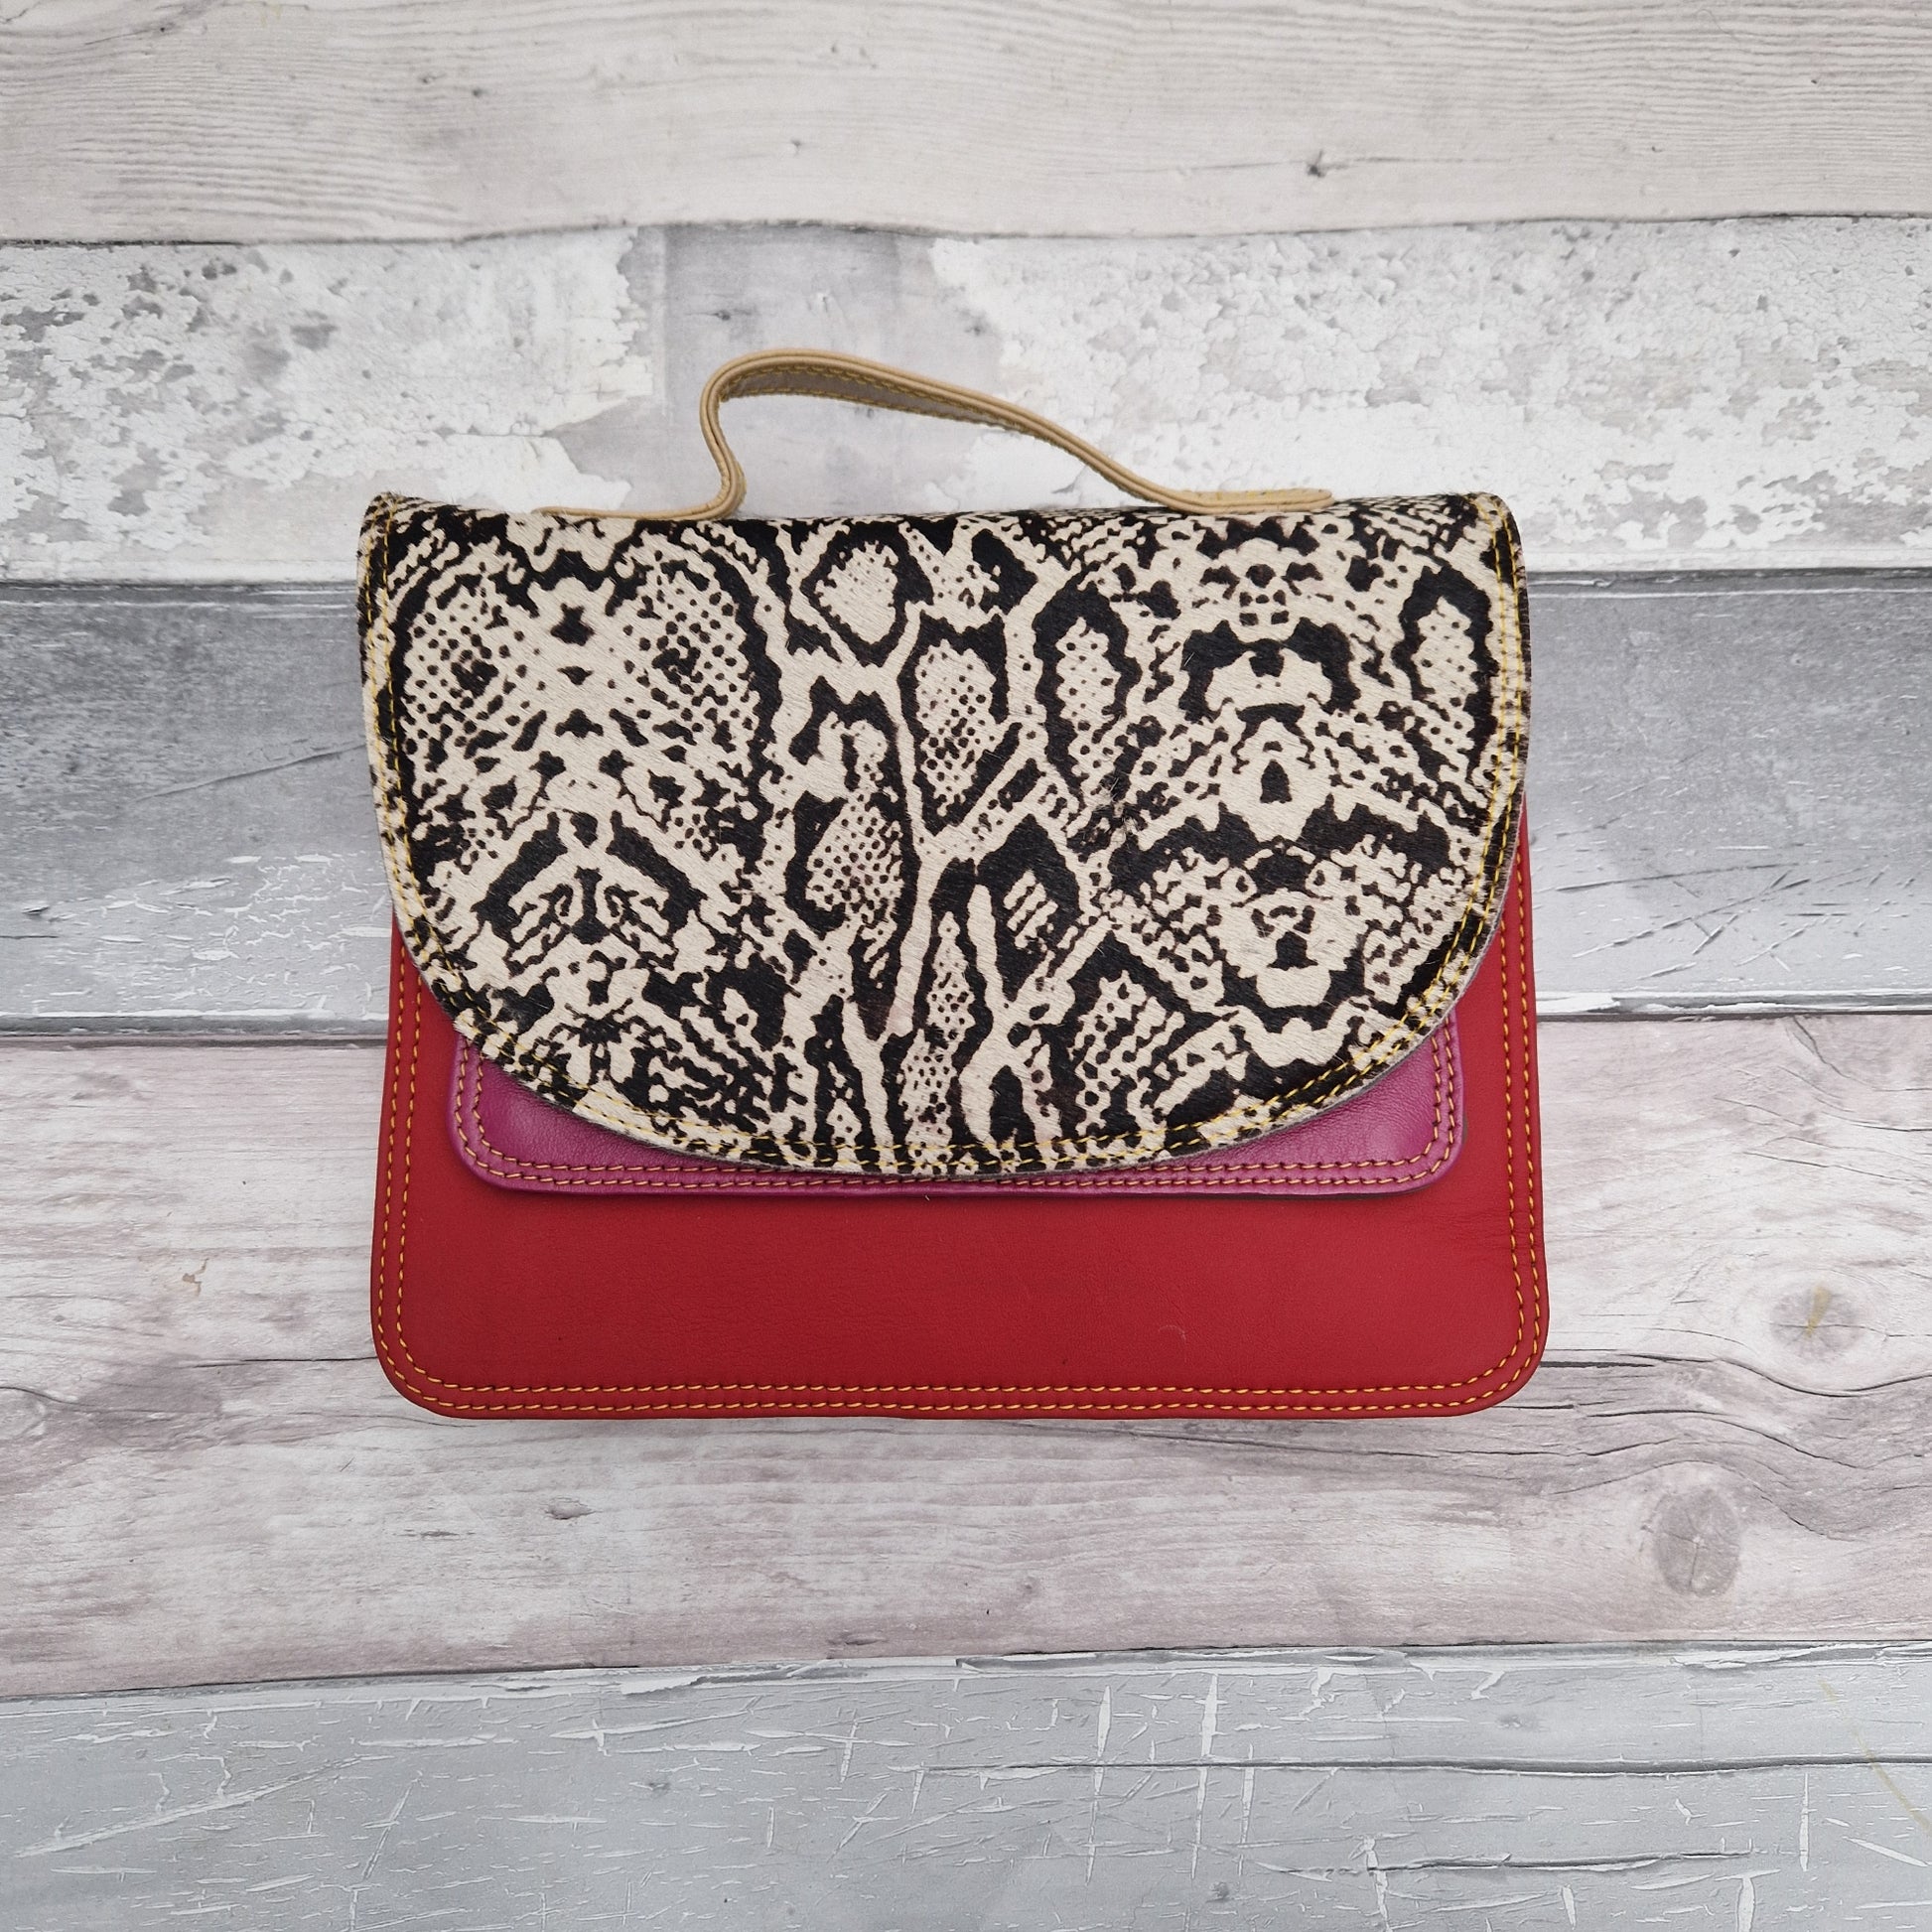 Red leather bag with a large snake skin patterned panel.